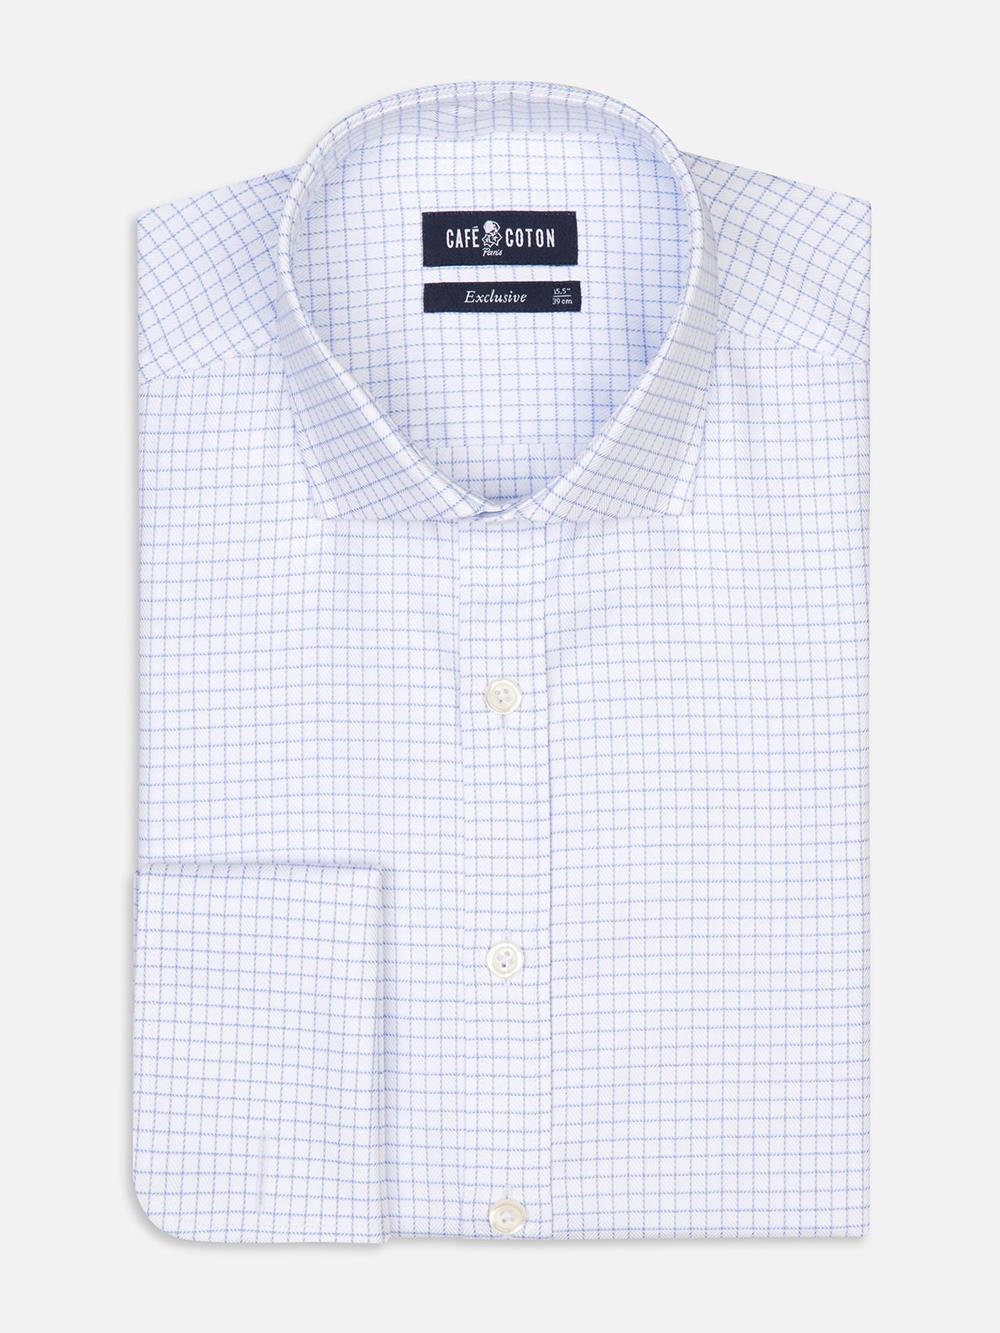 Oleg check shirt with double cuffs - Blue sky